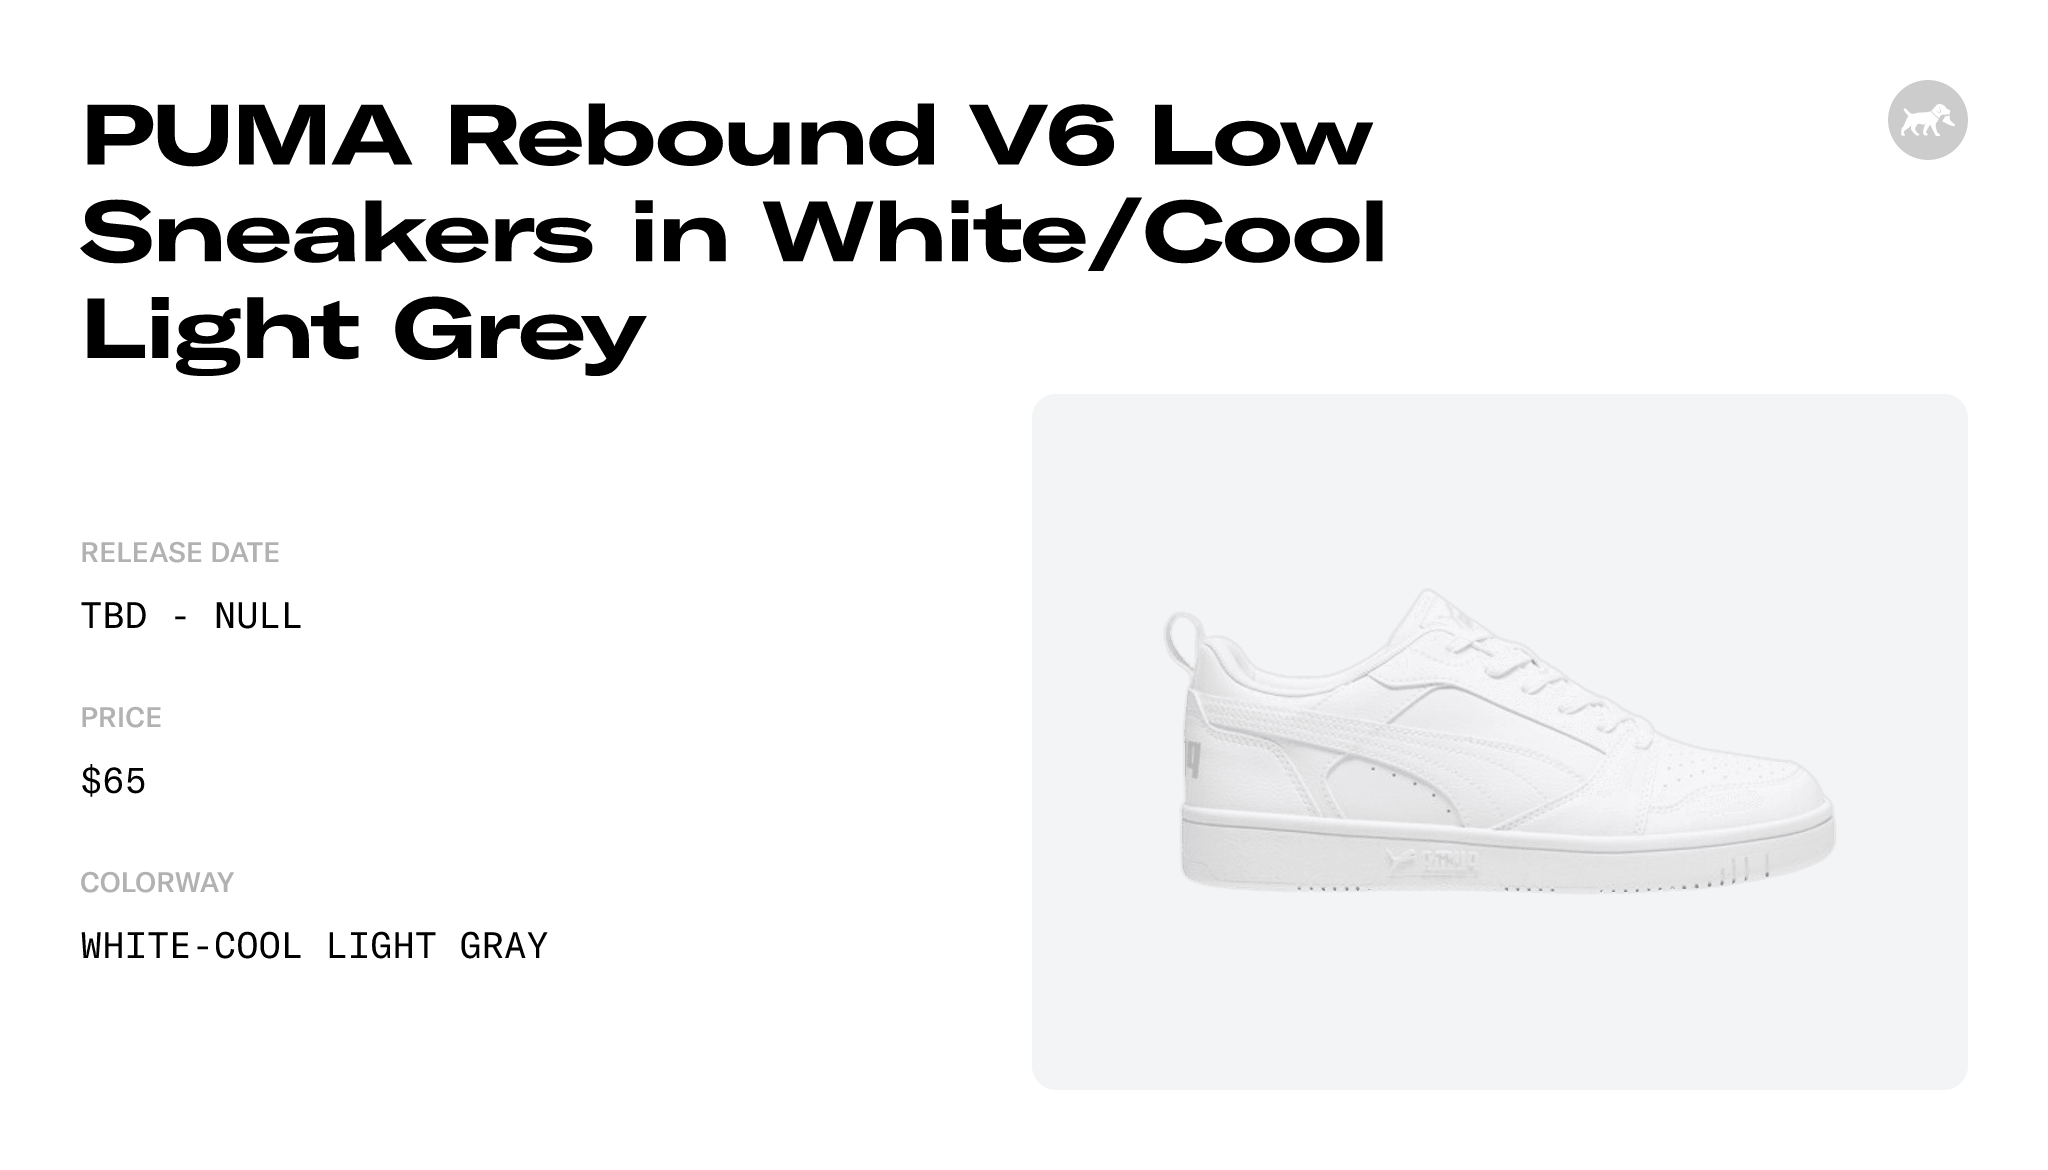 V6 392328-03 White/Cool Grey in PUMA Sneakers - Date Release Raffles Light Rebound and Low